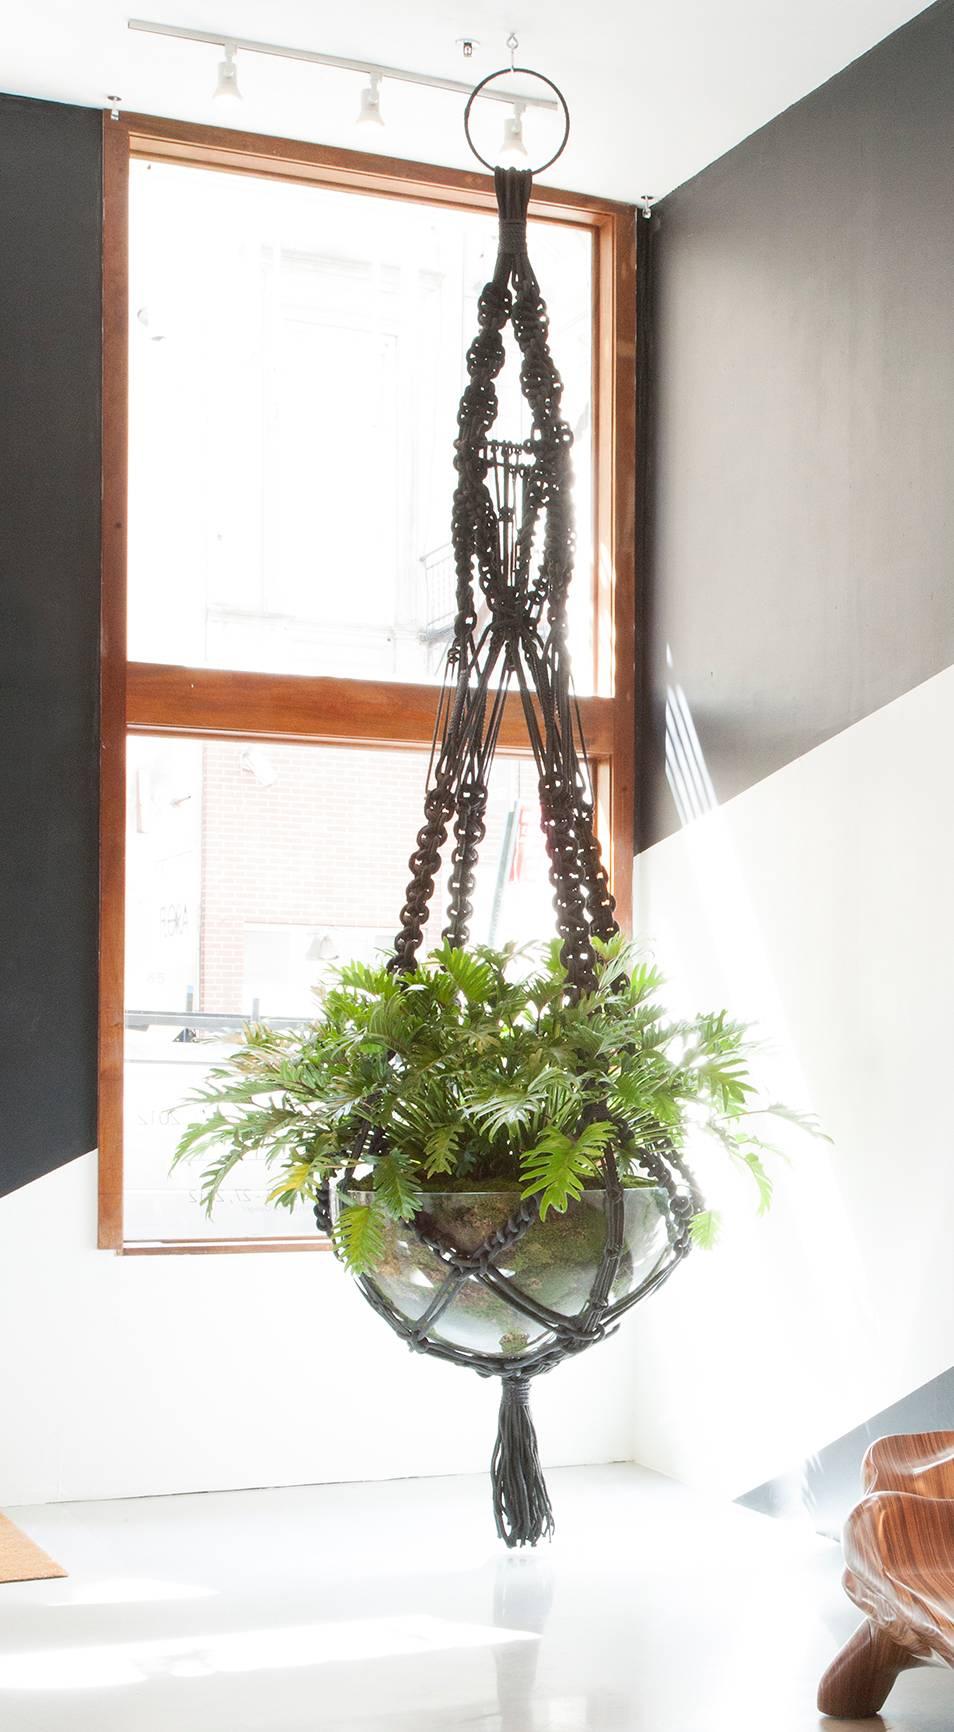 Large-scale hand knotted macrame plant hanger available in custom sizes and colors with a variety of trims and ornamentation.
Price listed is for 5'-6' plant hanger. Prices for larger sizes are as follows:

7' - 8' plant hanger: $ 1,325.00
9' - 10'